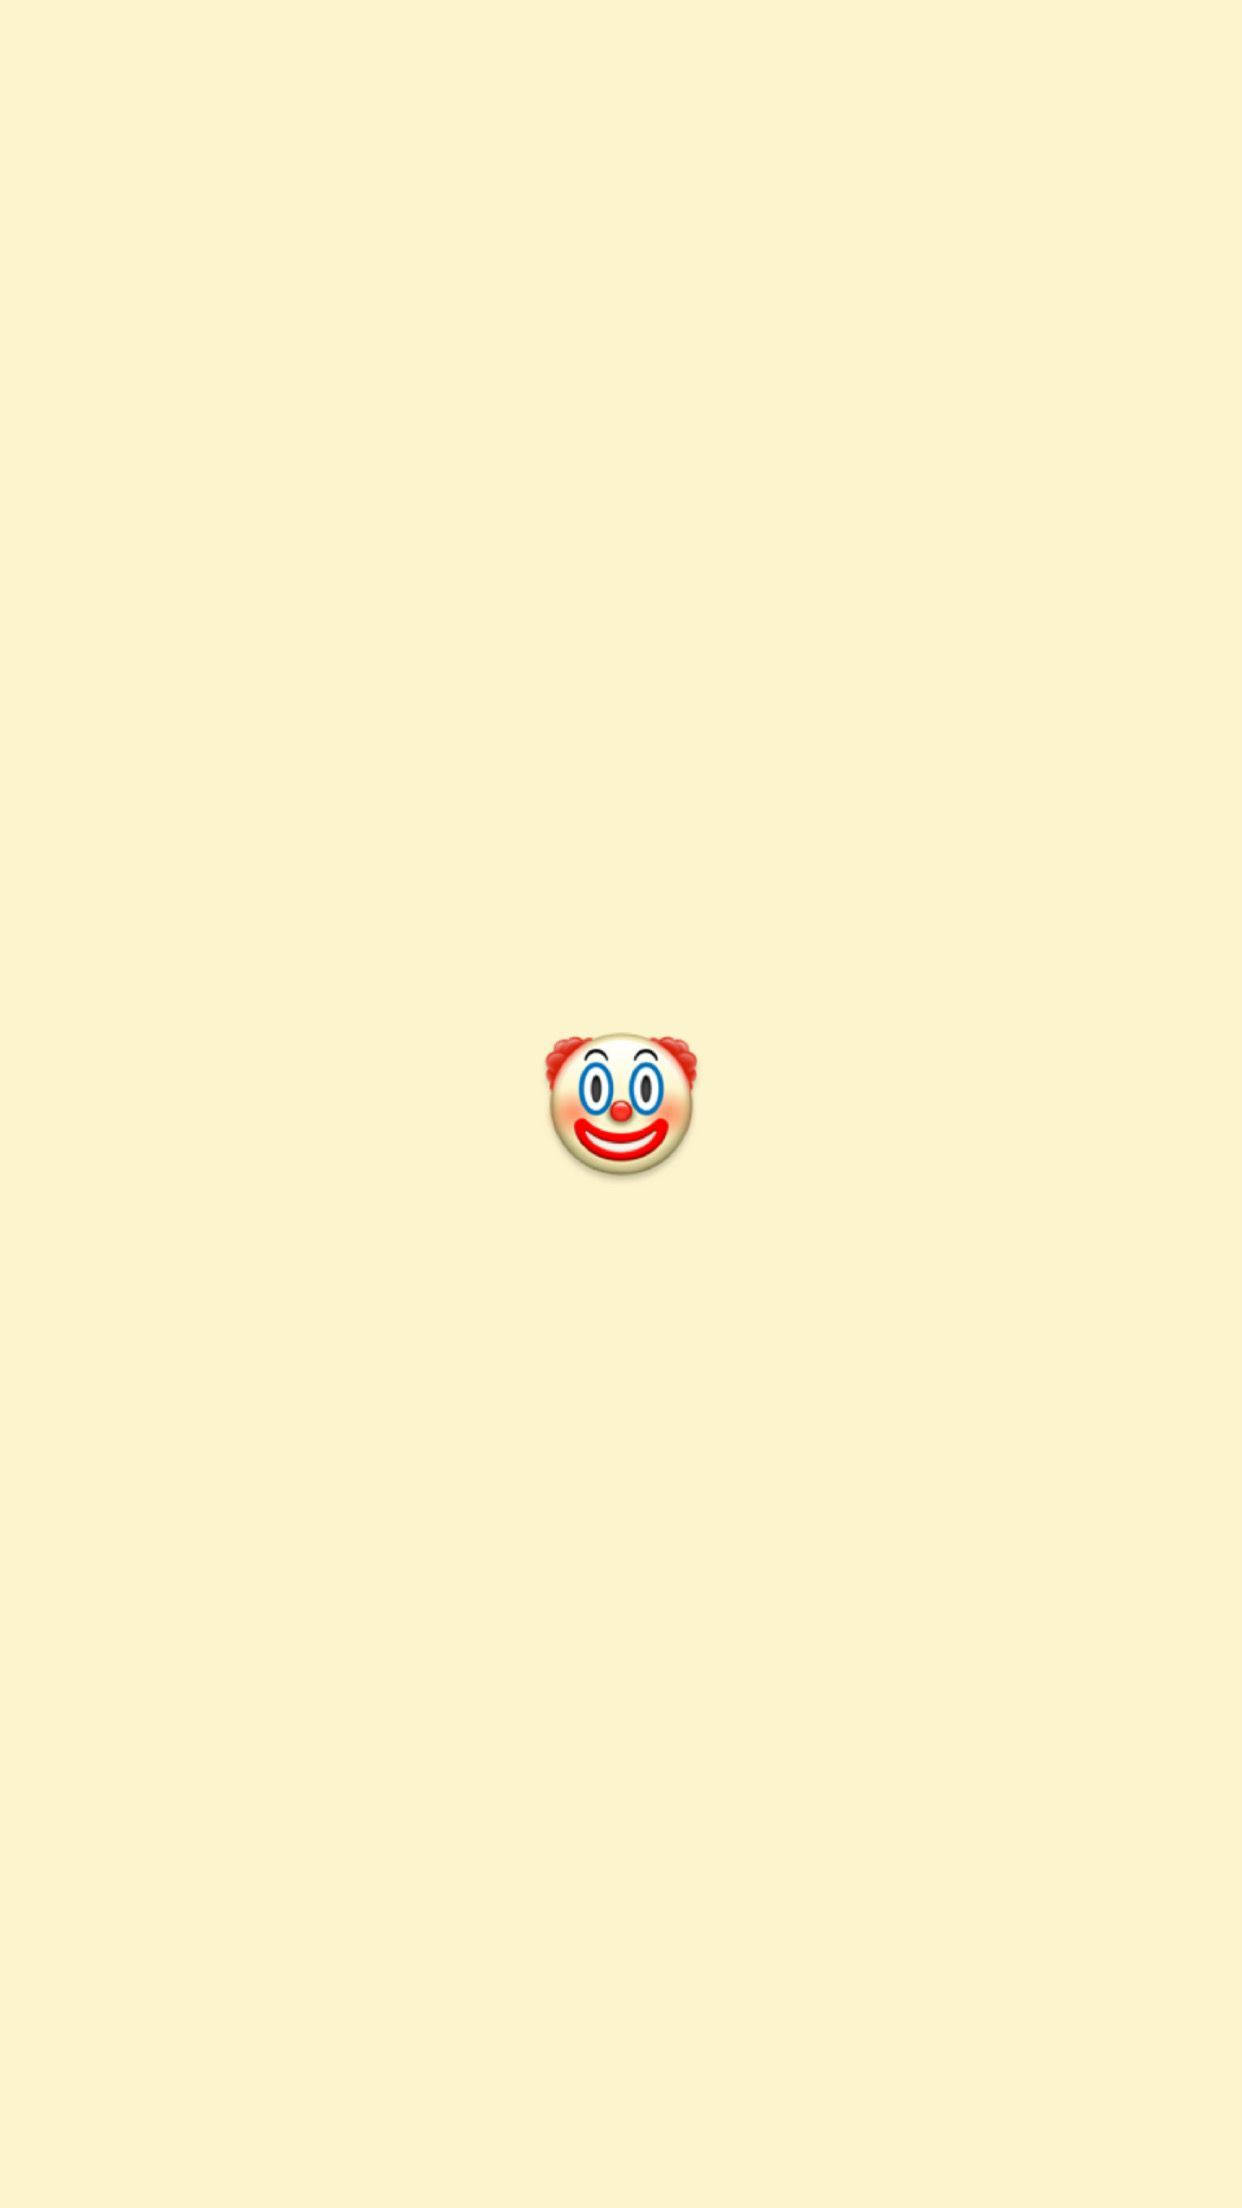 A yellow wallpaper with a red emoticon of a smiling face. - Clown